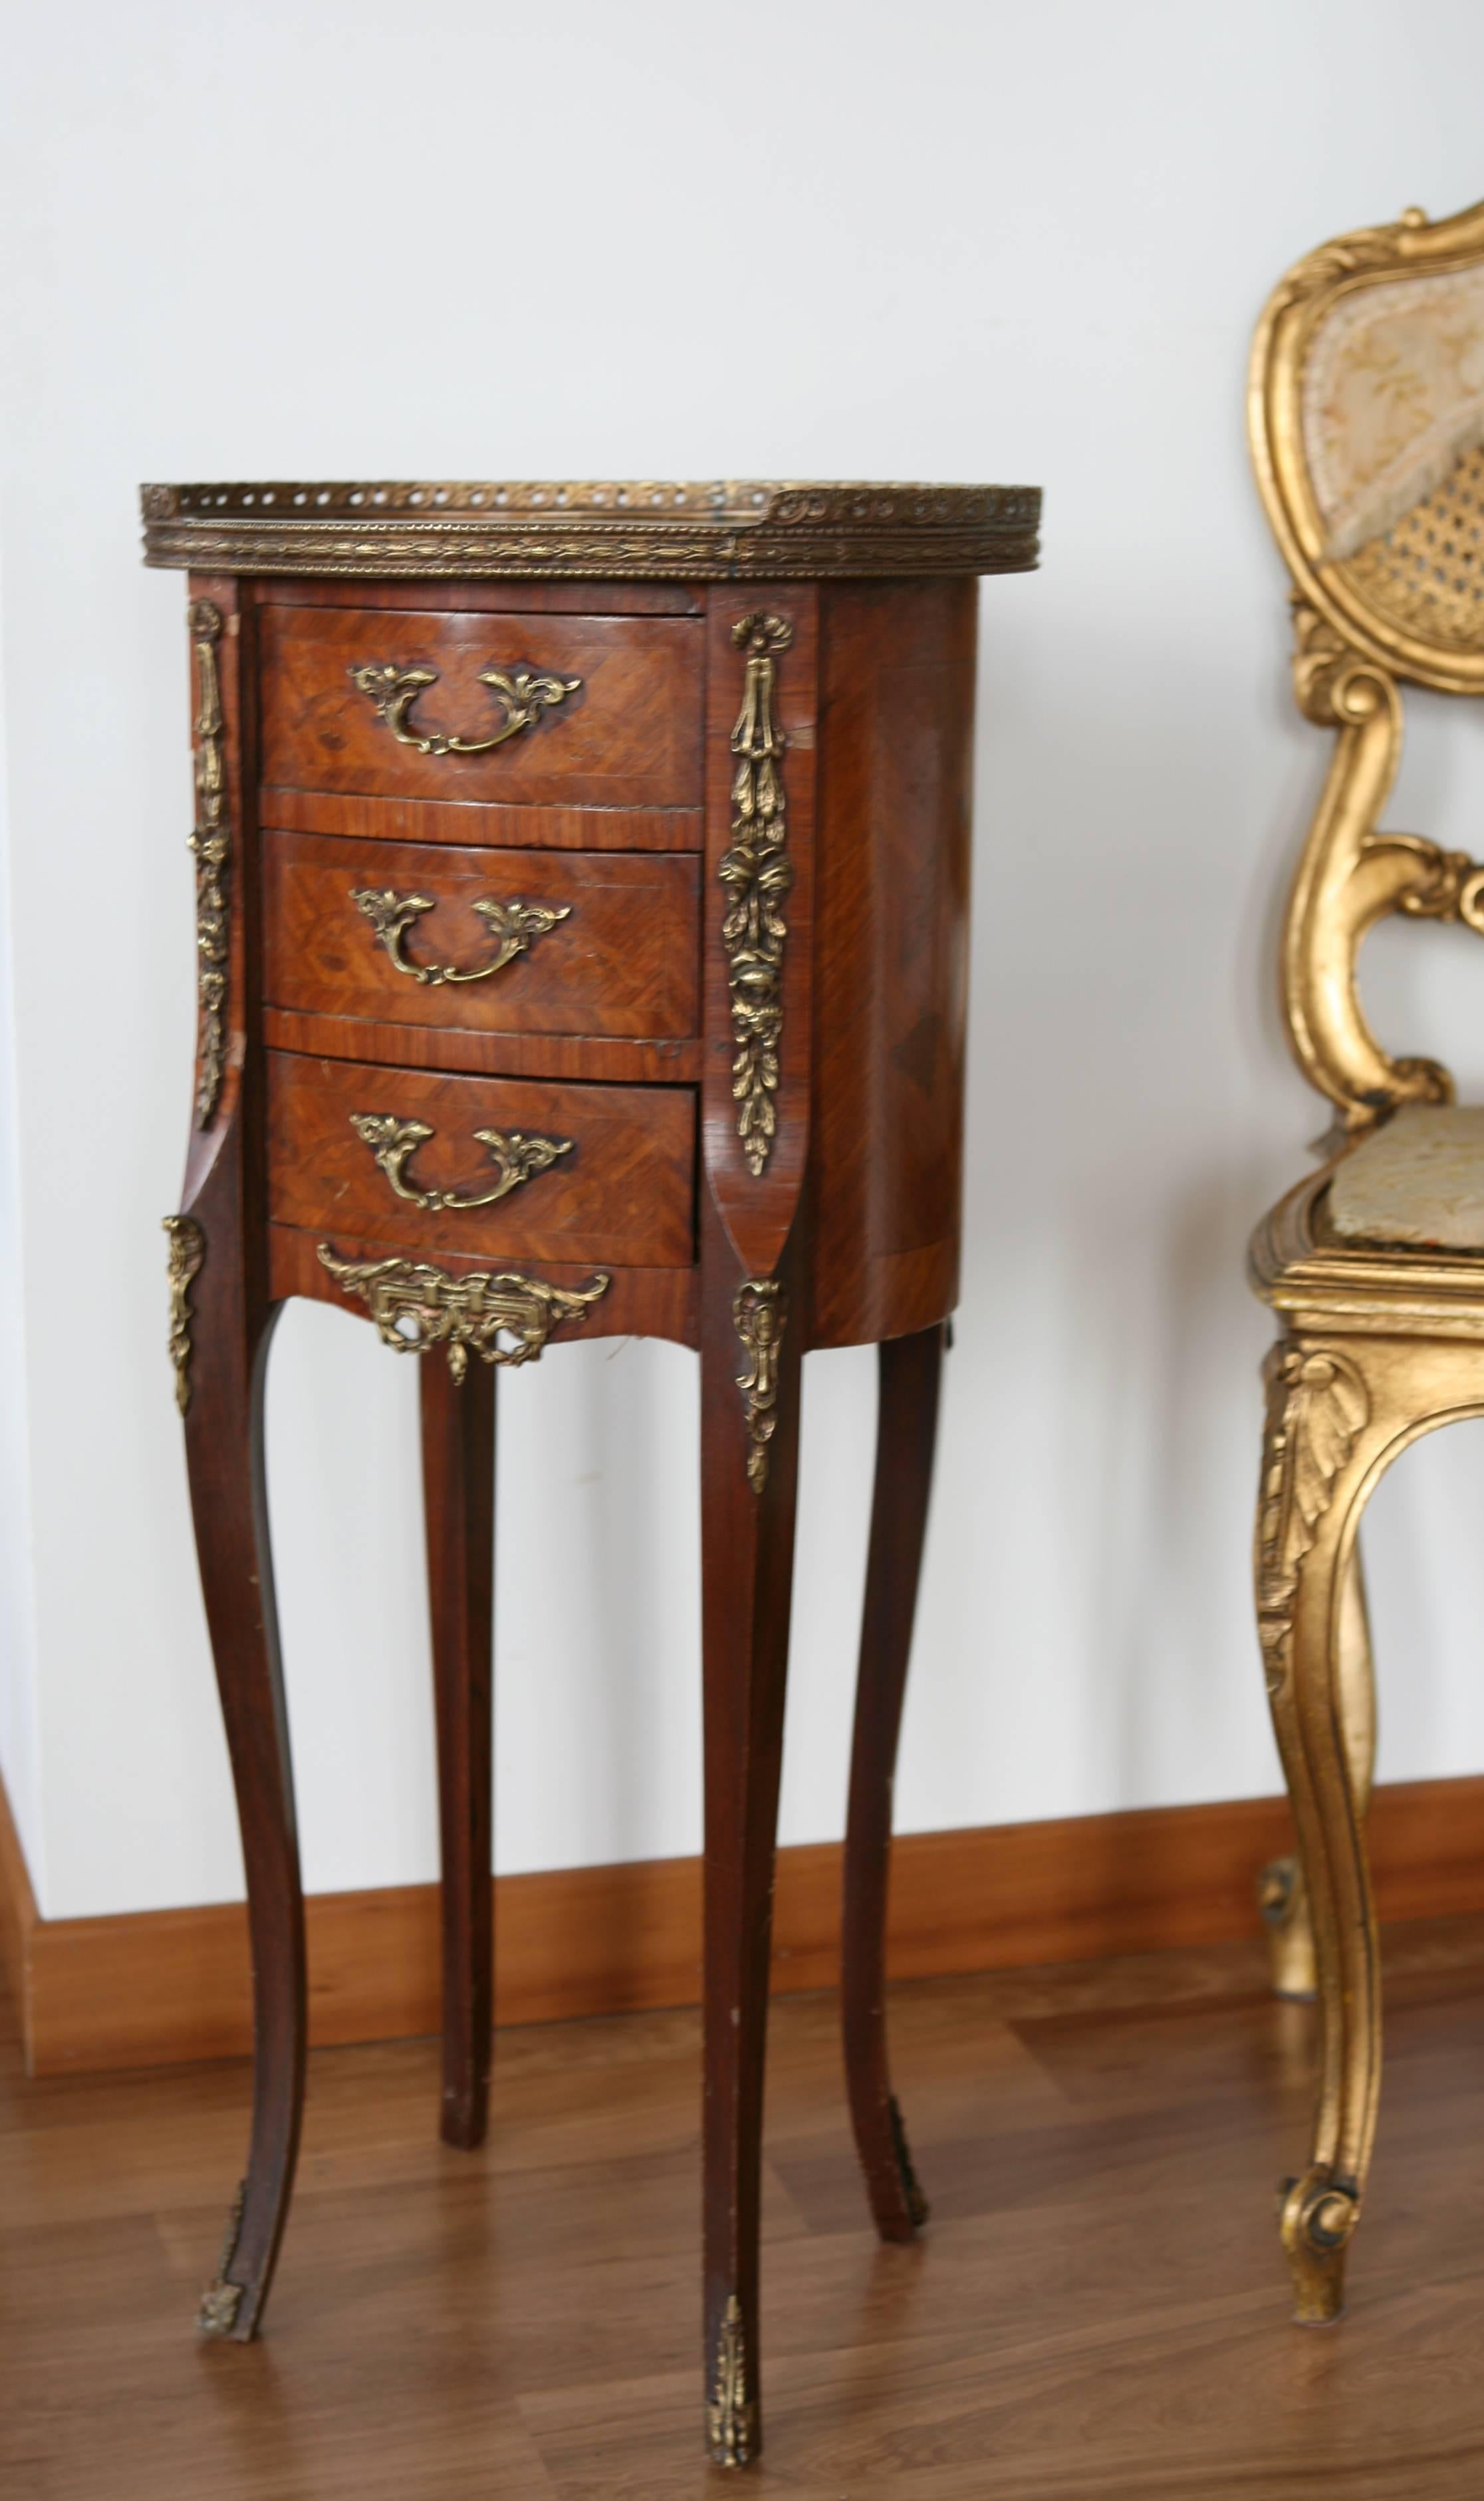 19th century French Louis XV style marquetry side table with three elegant drawers and bronze decoration, resting on long legs.
France,
circa 1830.